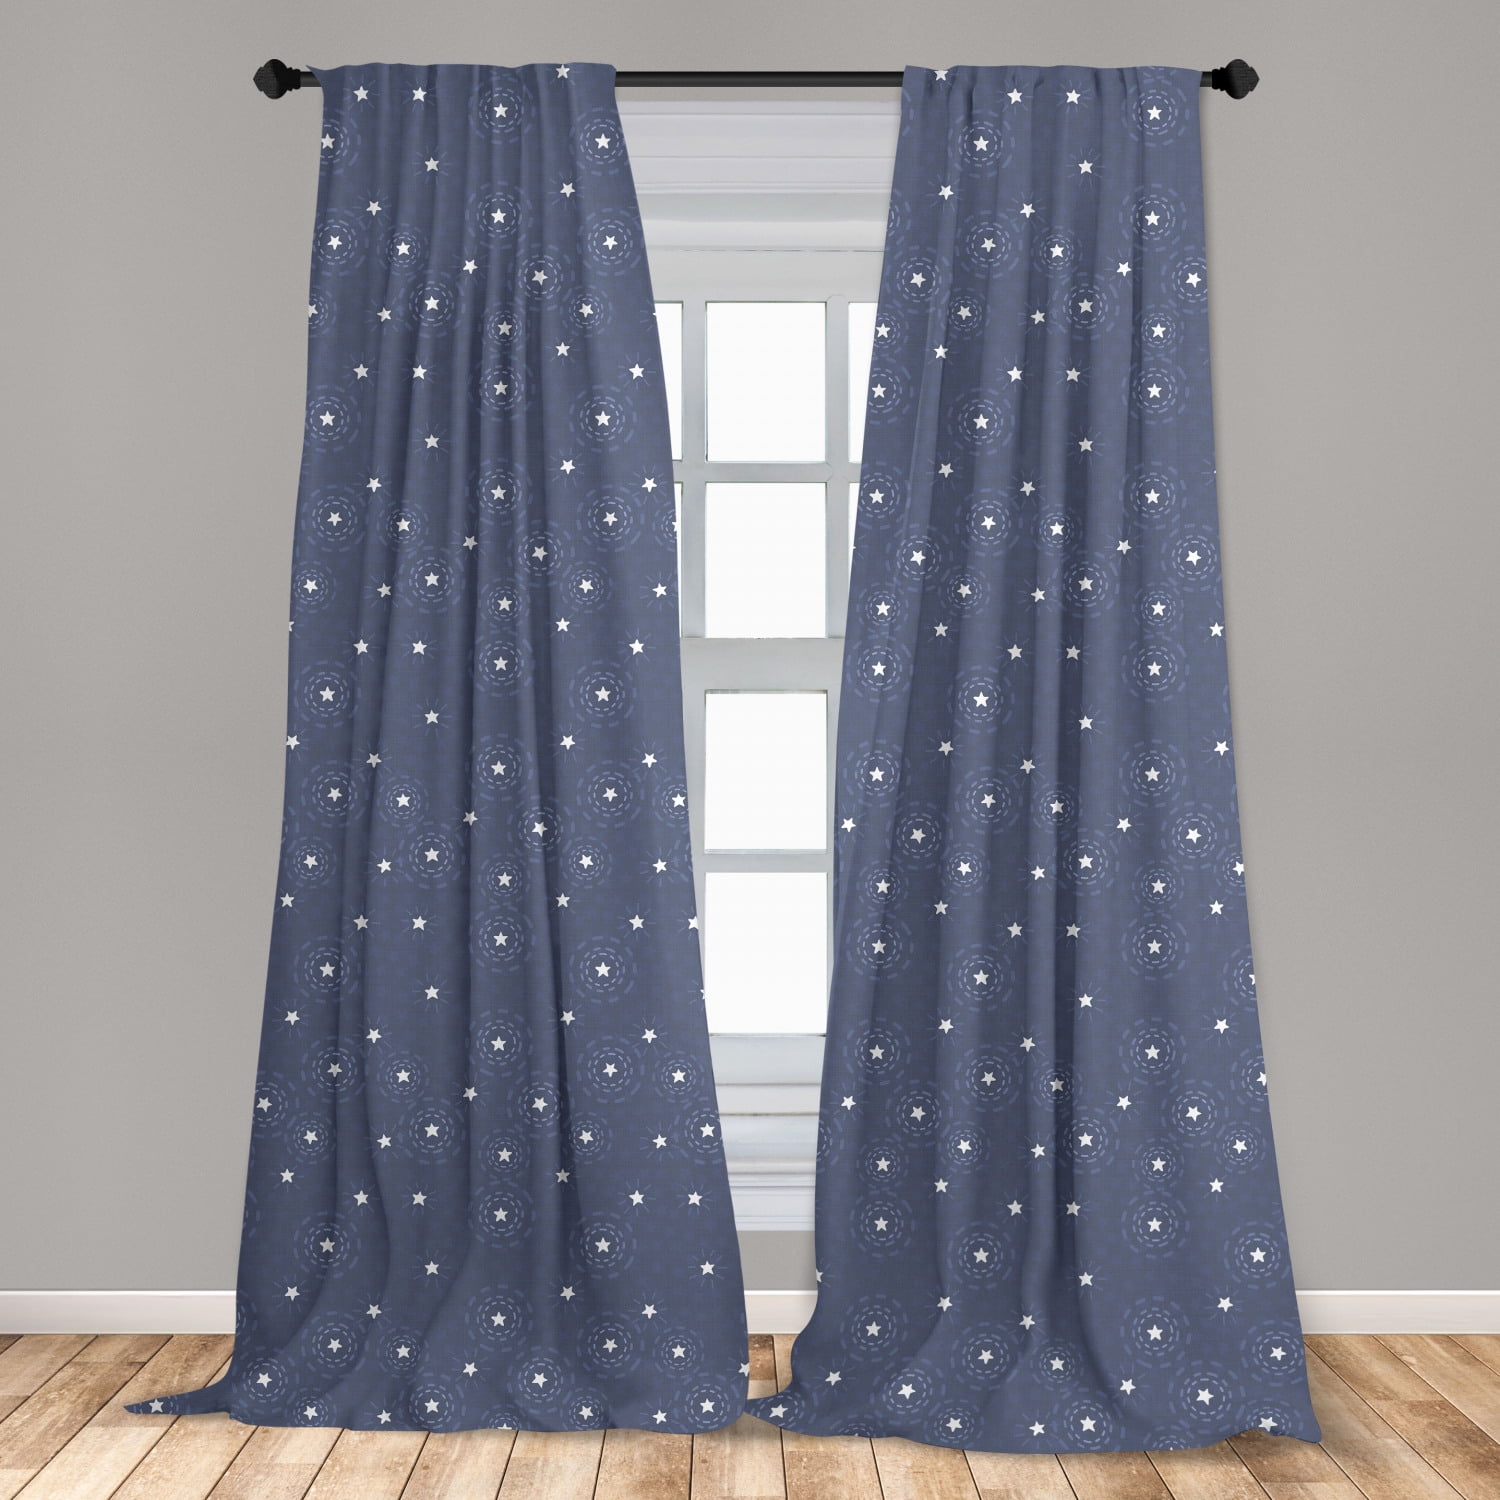 Childrens Kids Blockout Tape Top Curtains With Moon & Stars Design In Blue Pink 